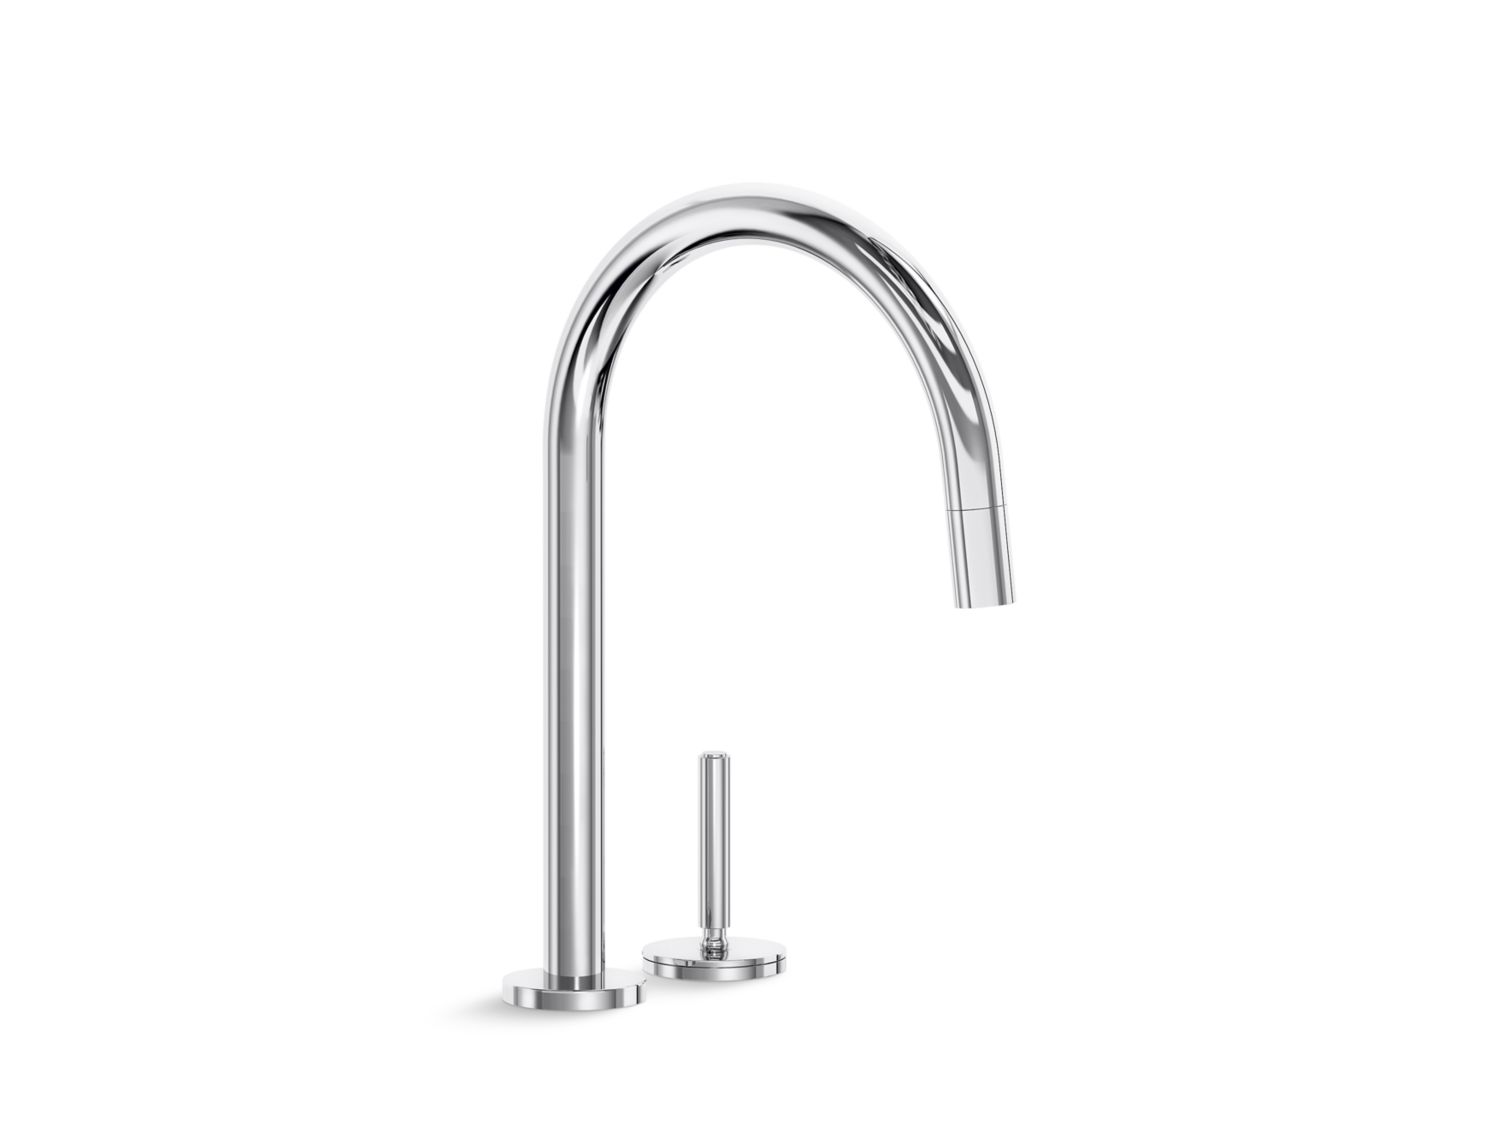 One Pull Down Kitchen Faucet P25200 00 Kitchen Faucets